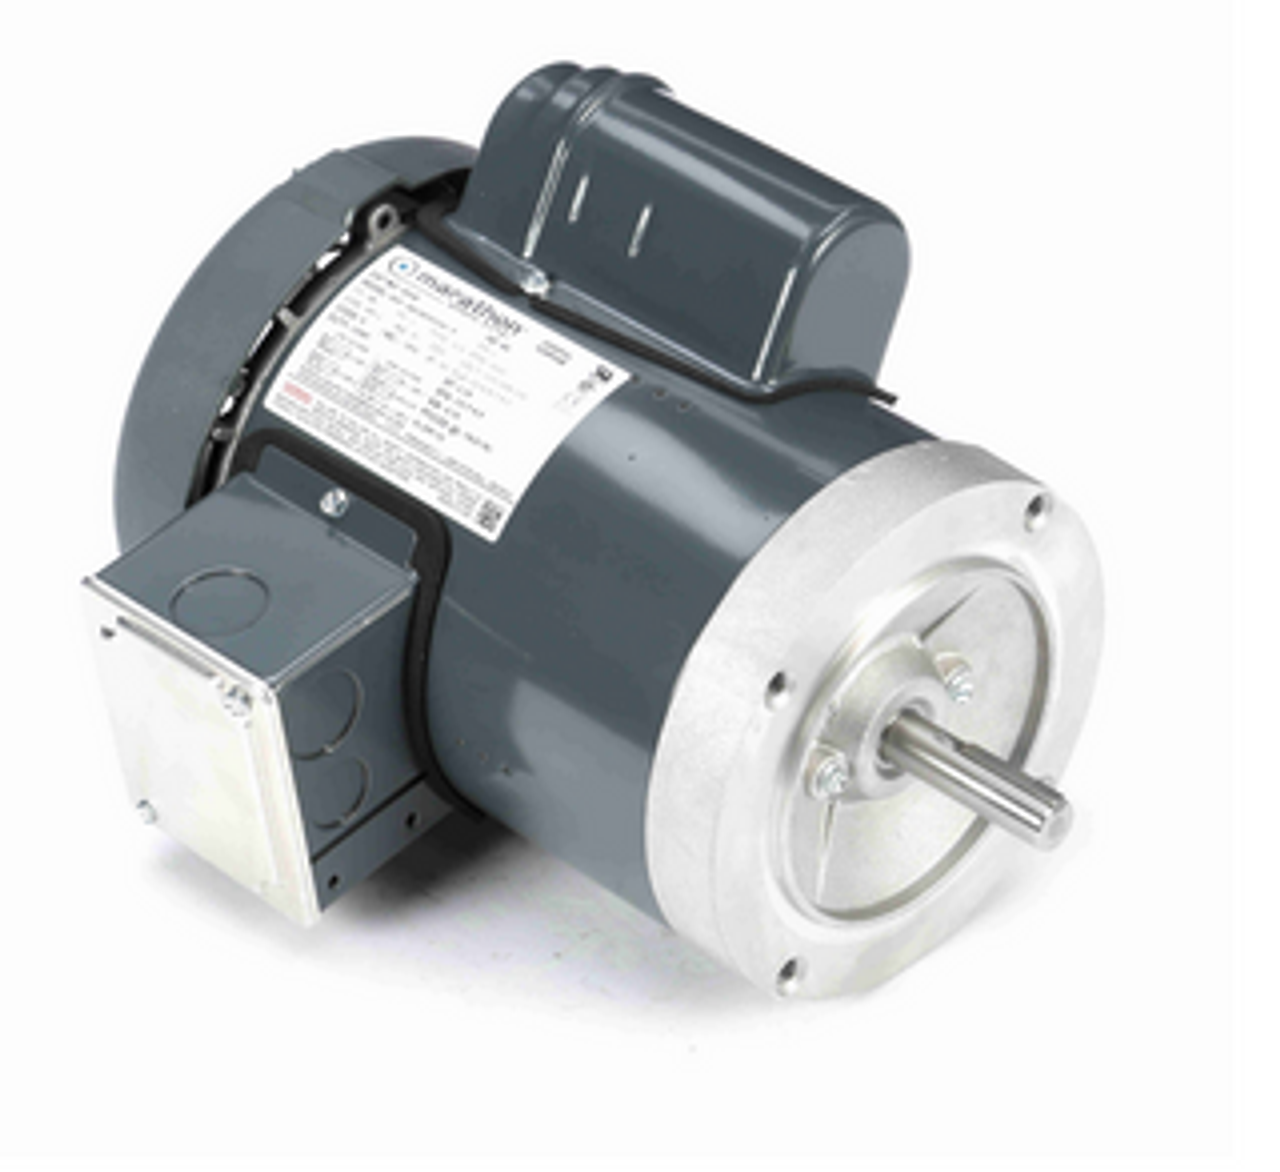 G518 Single Phase Totally Enclosed C-Face Motor 1 HP